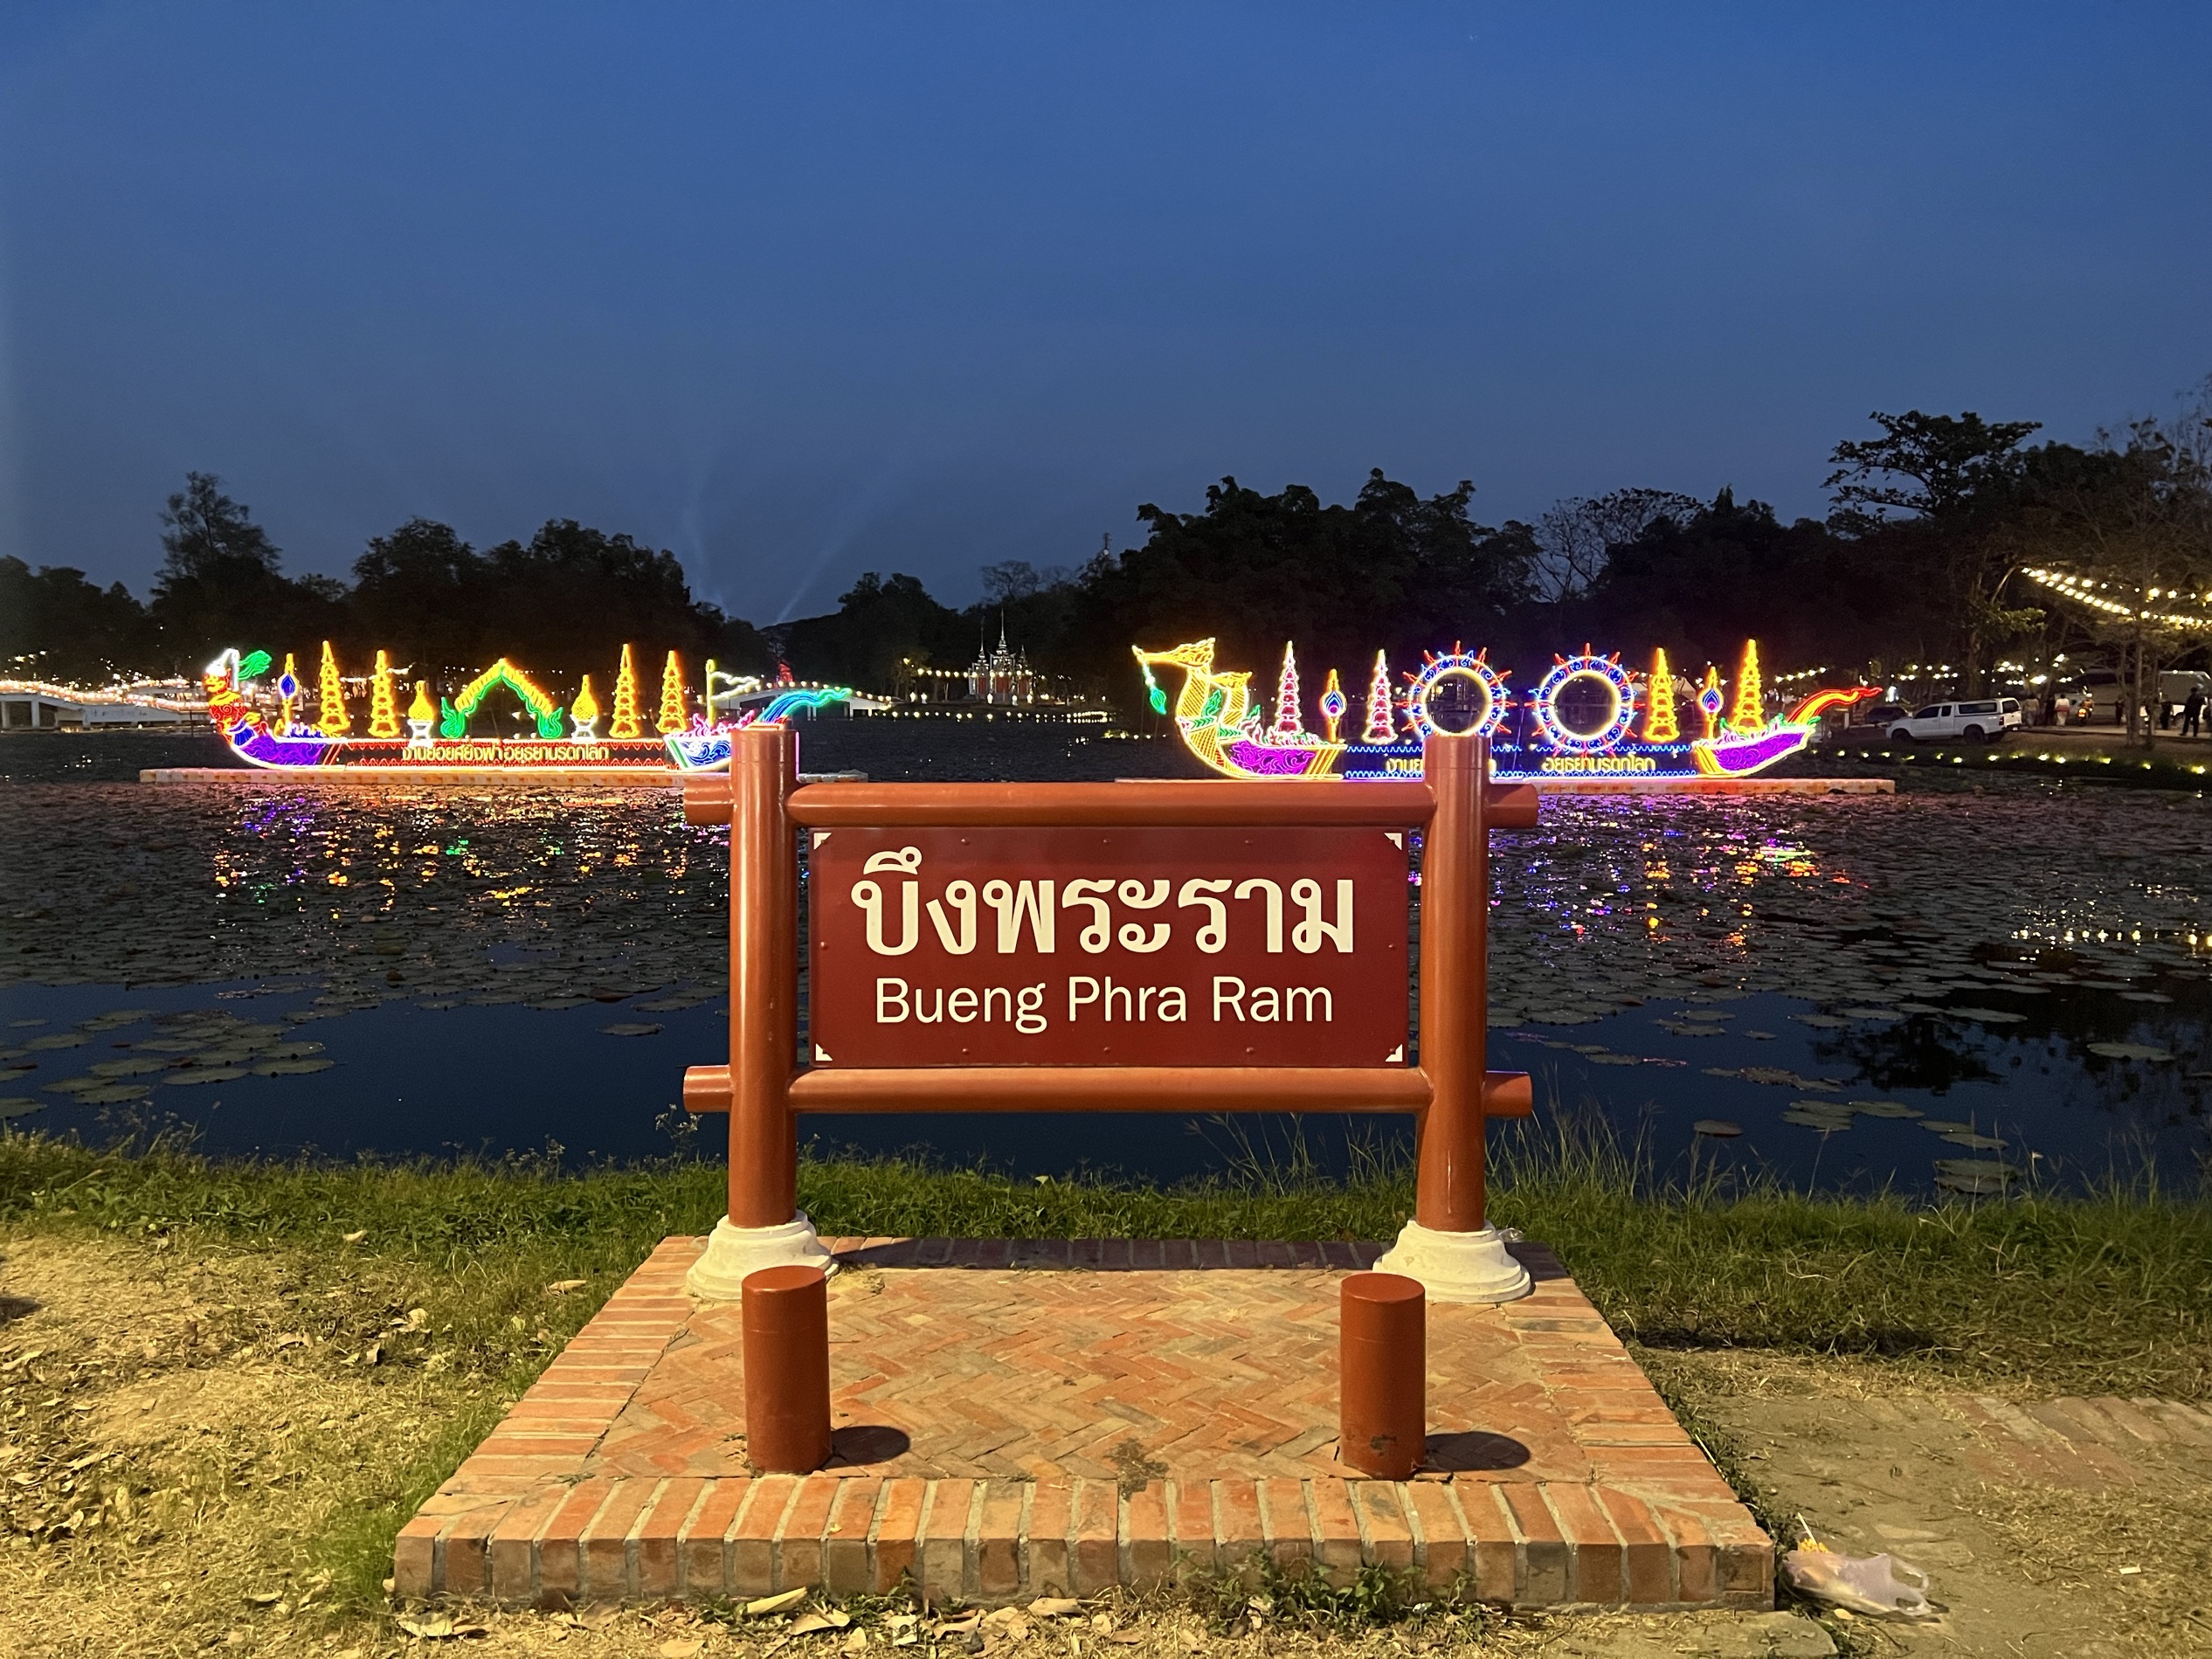 Bueng Phra Ram Park attraction reviews - Bueng Phra Ram Park tickets -  Bueng Phra Ram Park discounts - Bueng Phra Ram Park transportation,  address, opening hours - attractions, hotels, and food